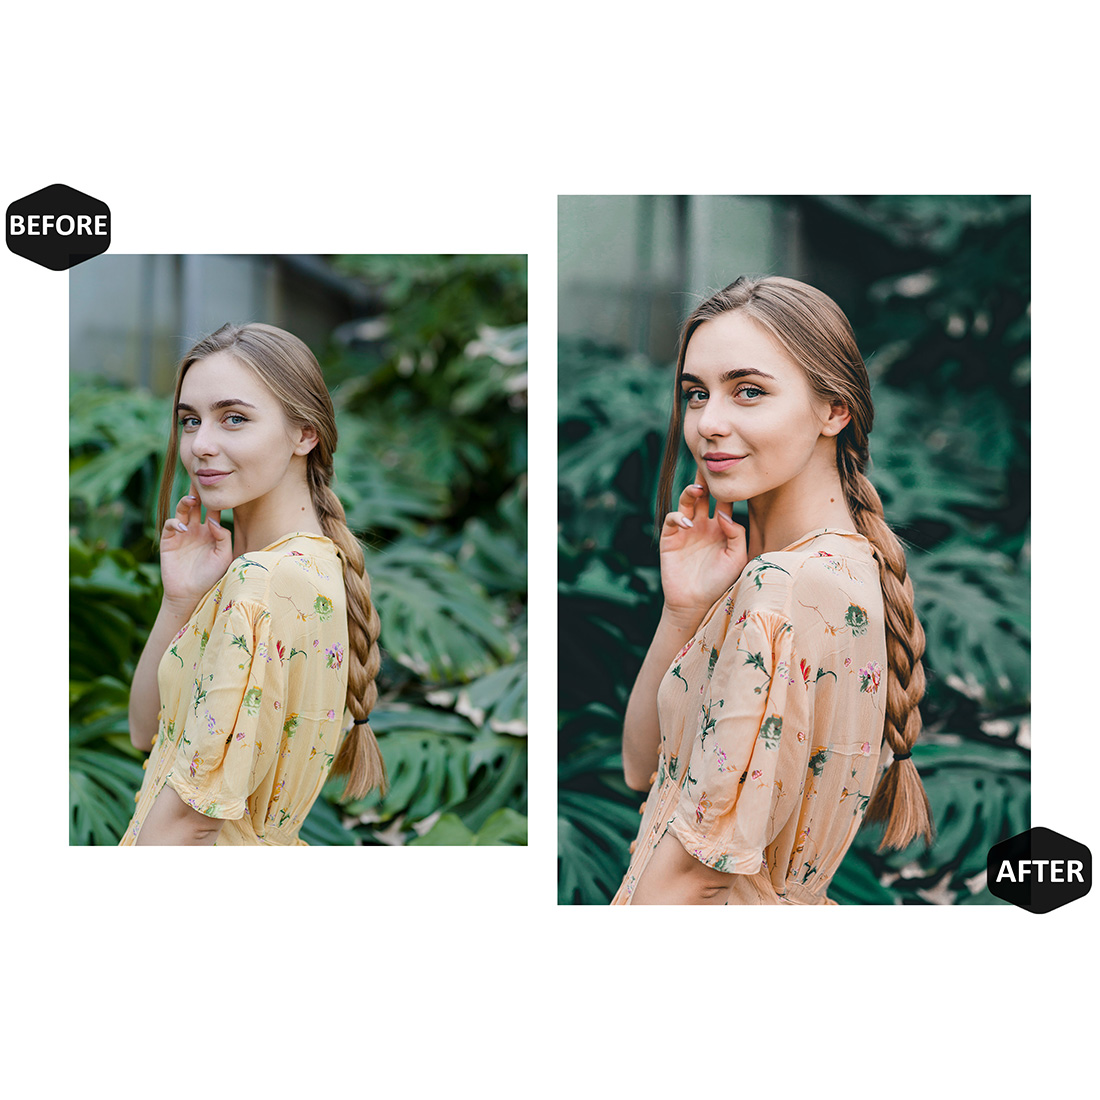 12 Photoshop Actions, Jungle Adventure Ps Action, Forest Moody ACR Preset, Travel Woman Ps Filter, Atn Portrait And Lifestyle Theme For Instagram, Blogger preview image.